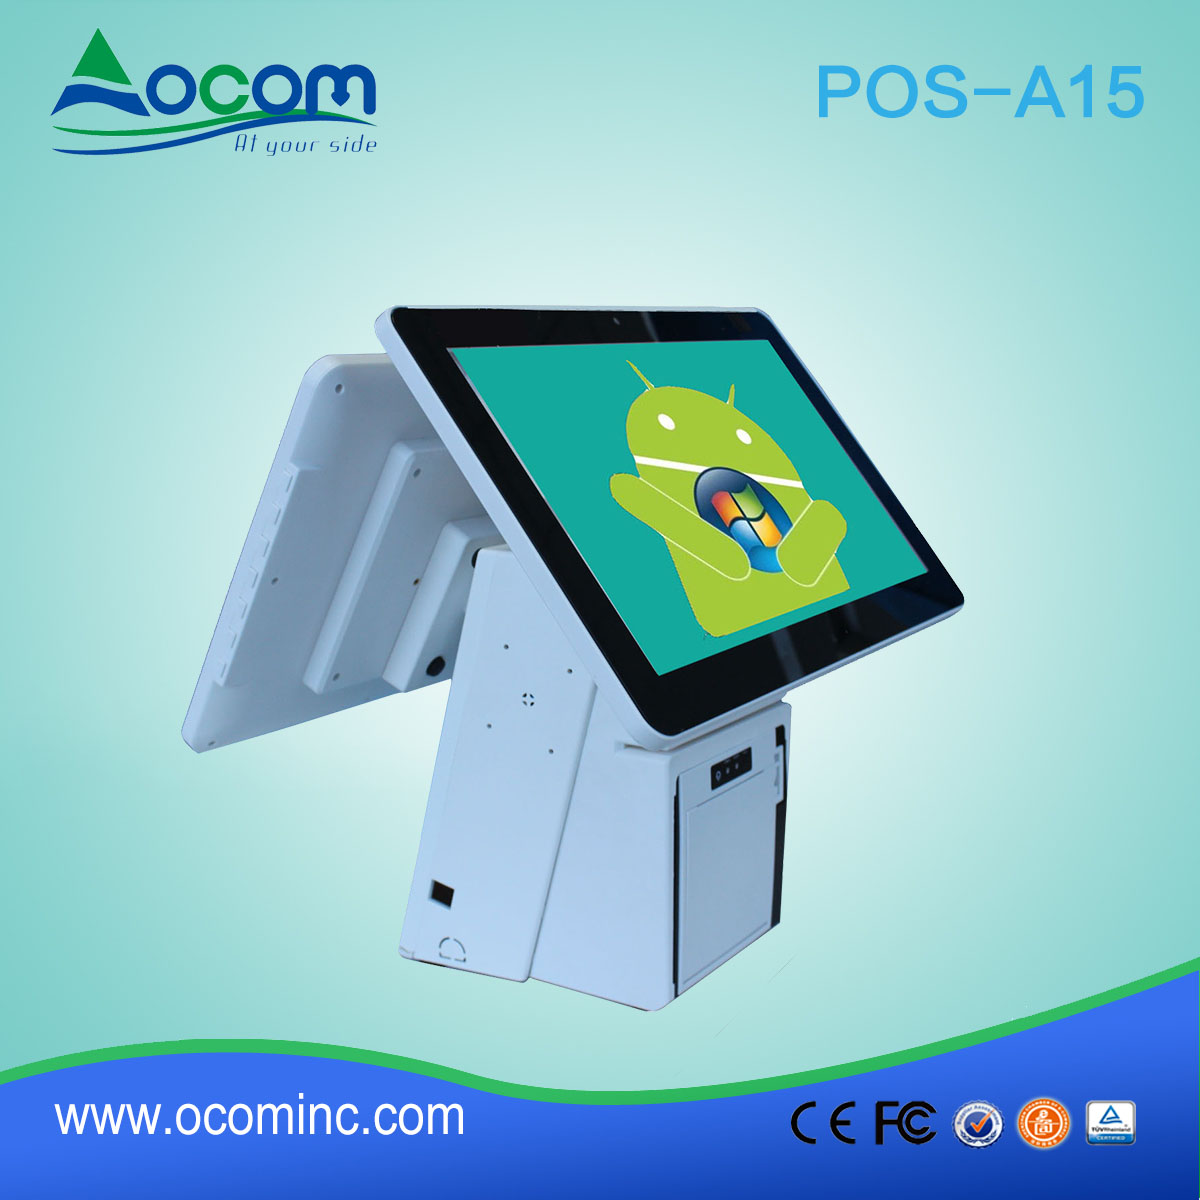 POS-A15---2017 OCOM new 15.6" touch screen pos terminal with thermal printer price